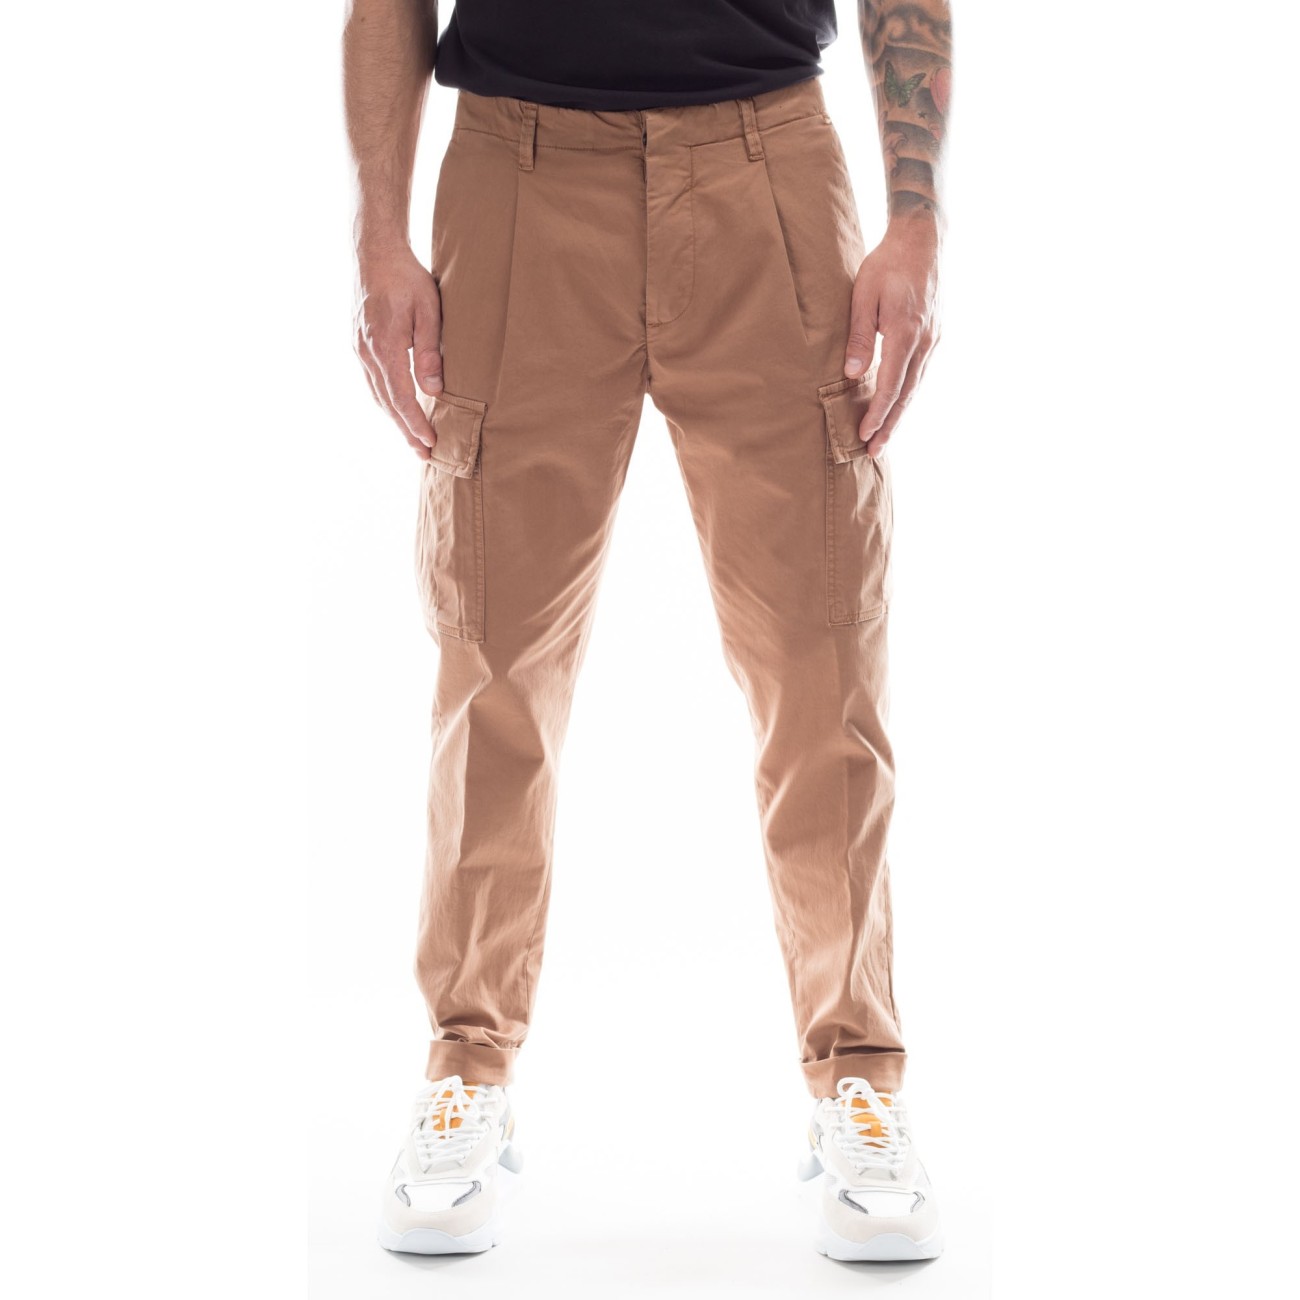 Brown chino pant outfit...